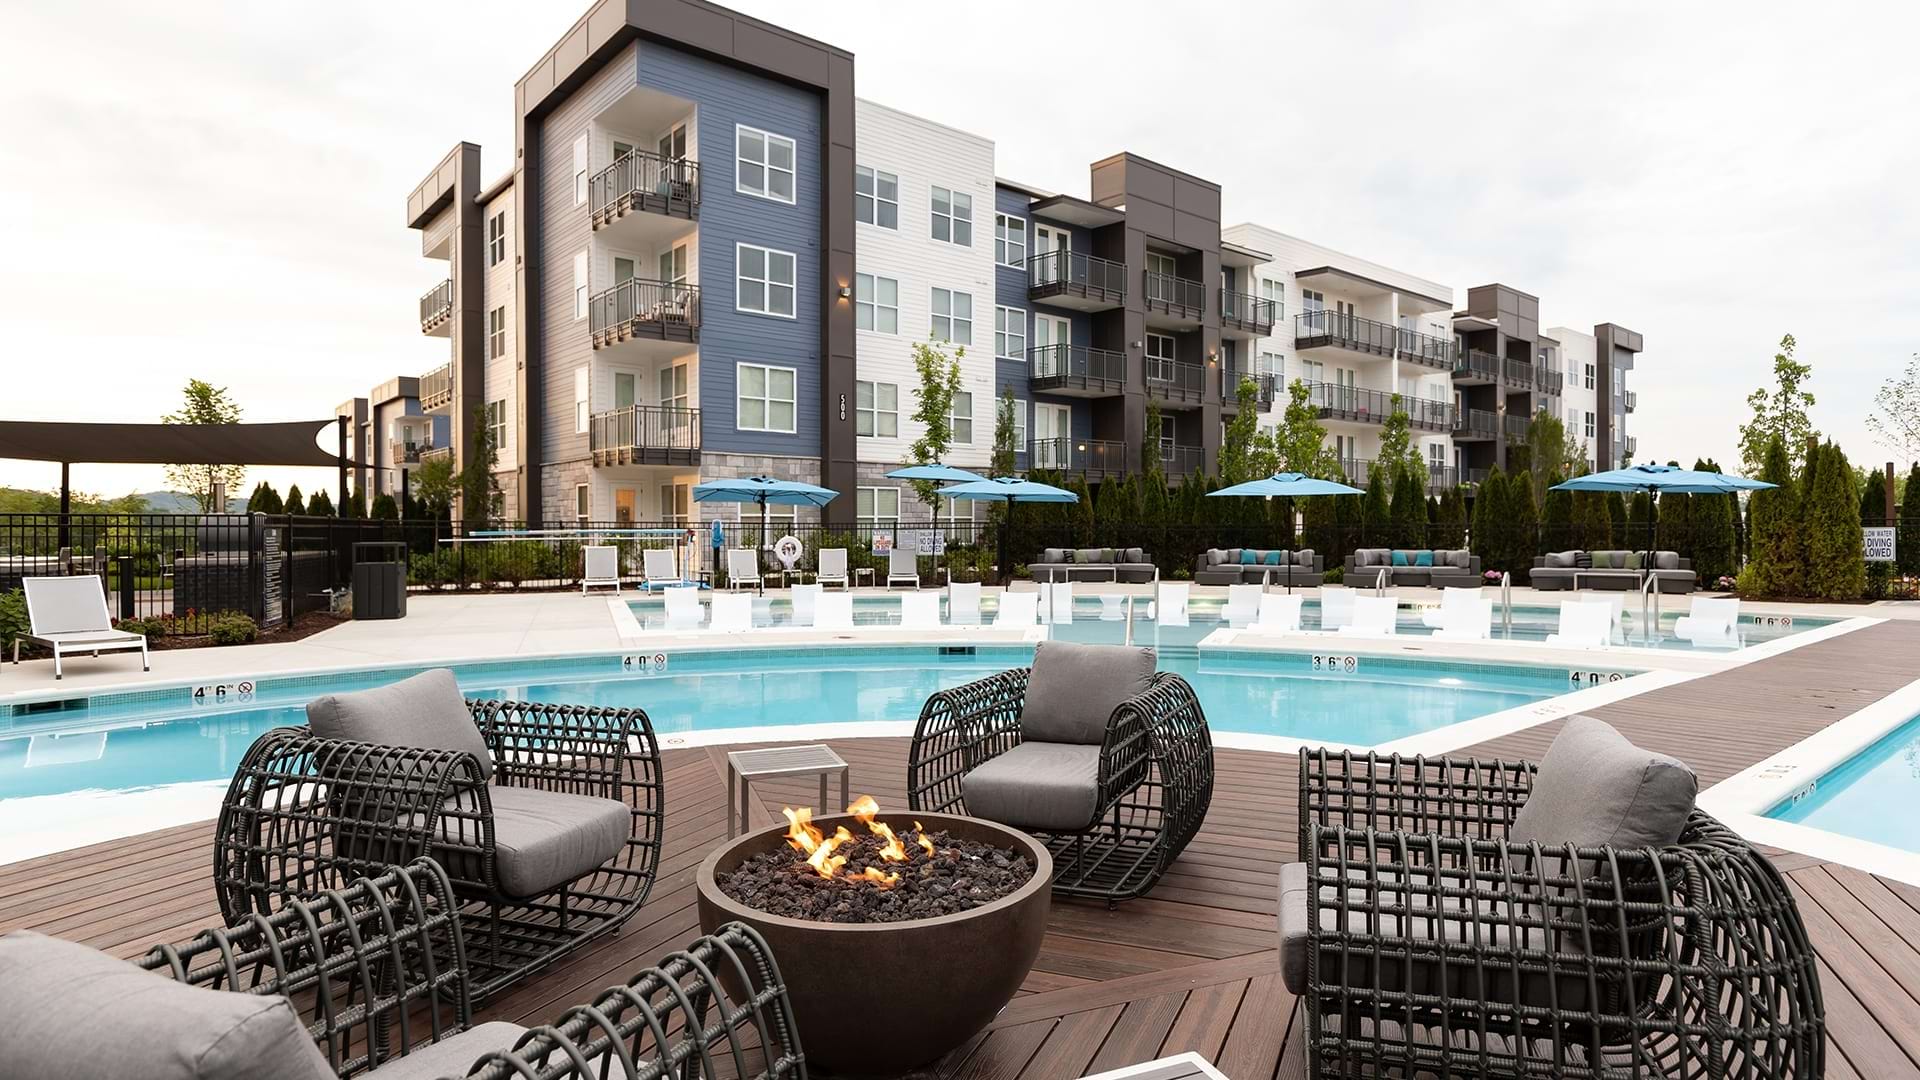 Poolside Fire Pit at Our West Nashville Apartments